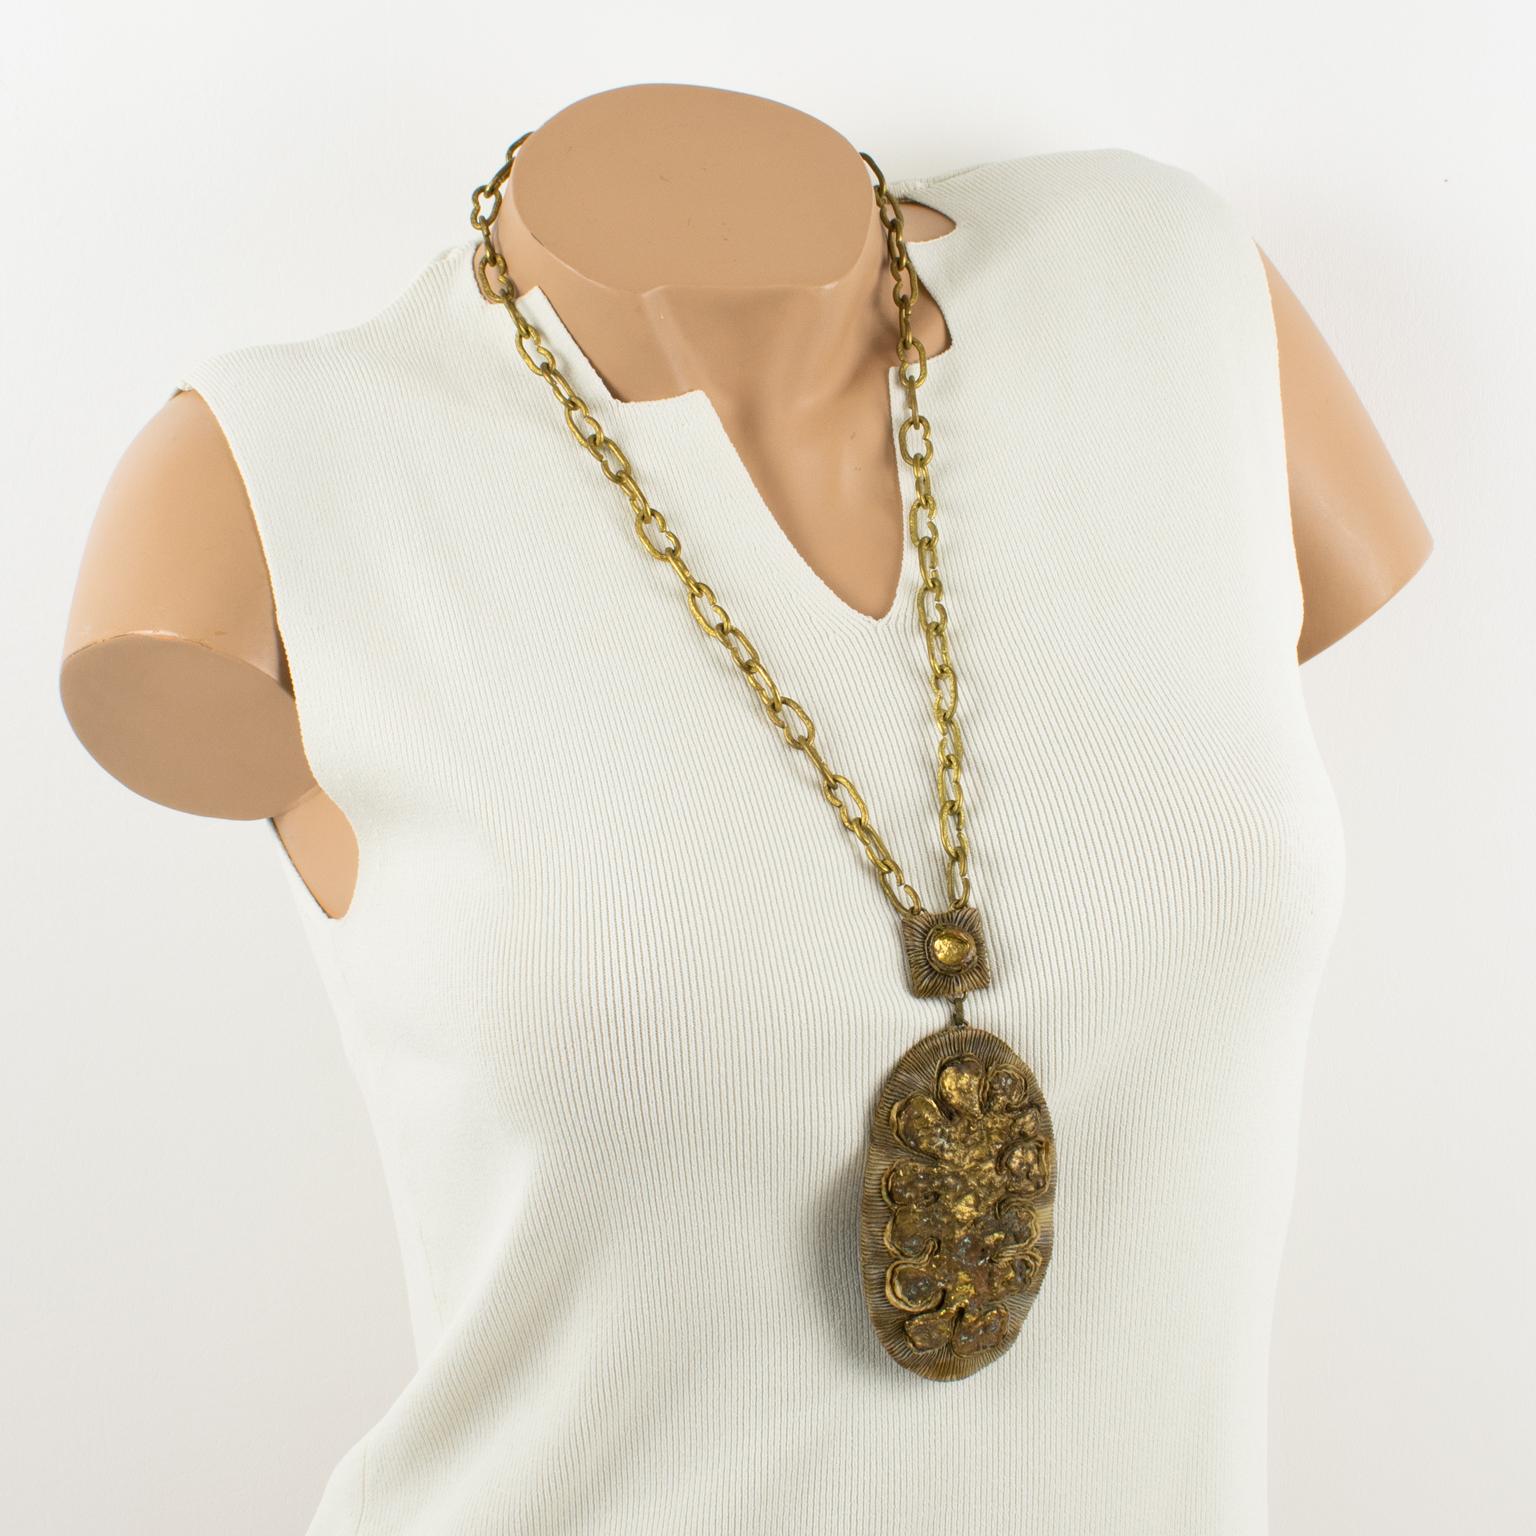 French jewelry artist Henry Perichon (aka Henry) designed this unique Talosel and bronze pendant necklace in the 1960s. The piece features a worked gilded heavy chain complimented with a brown-beige Talosel resin oval pendant. The central medallion